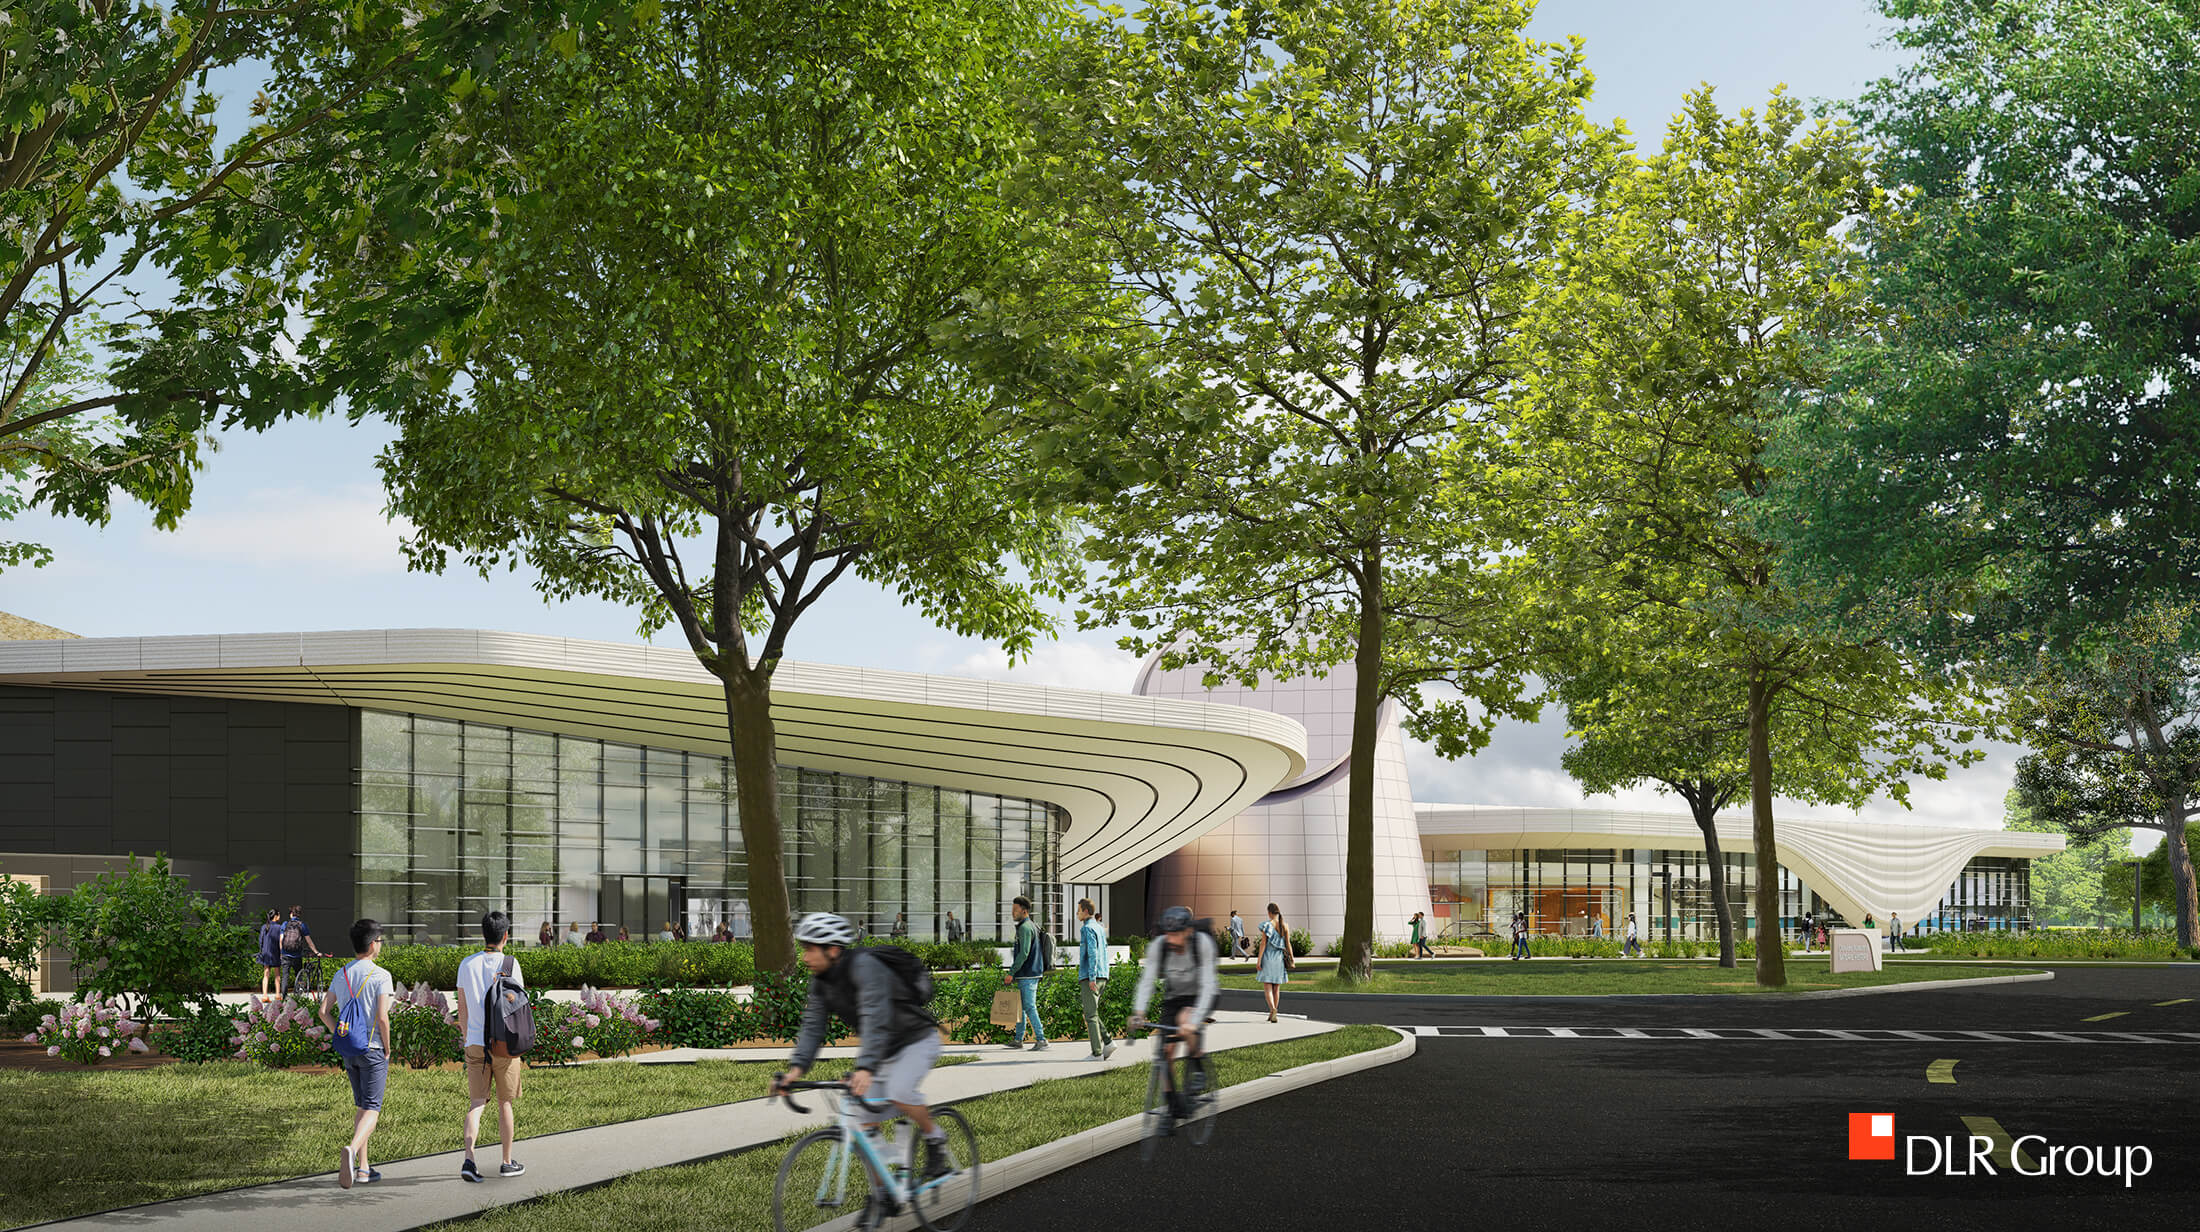 exterior rendering of a museum building with curving concrete forms on the roofline